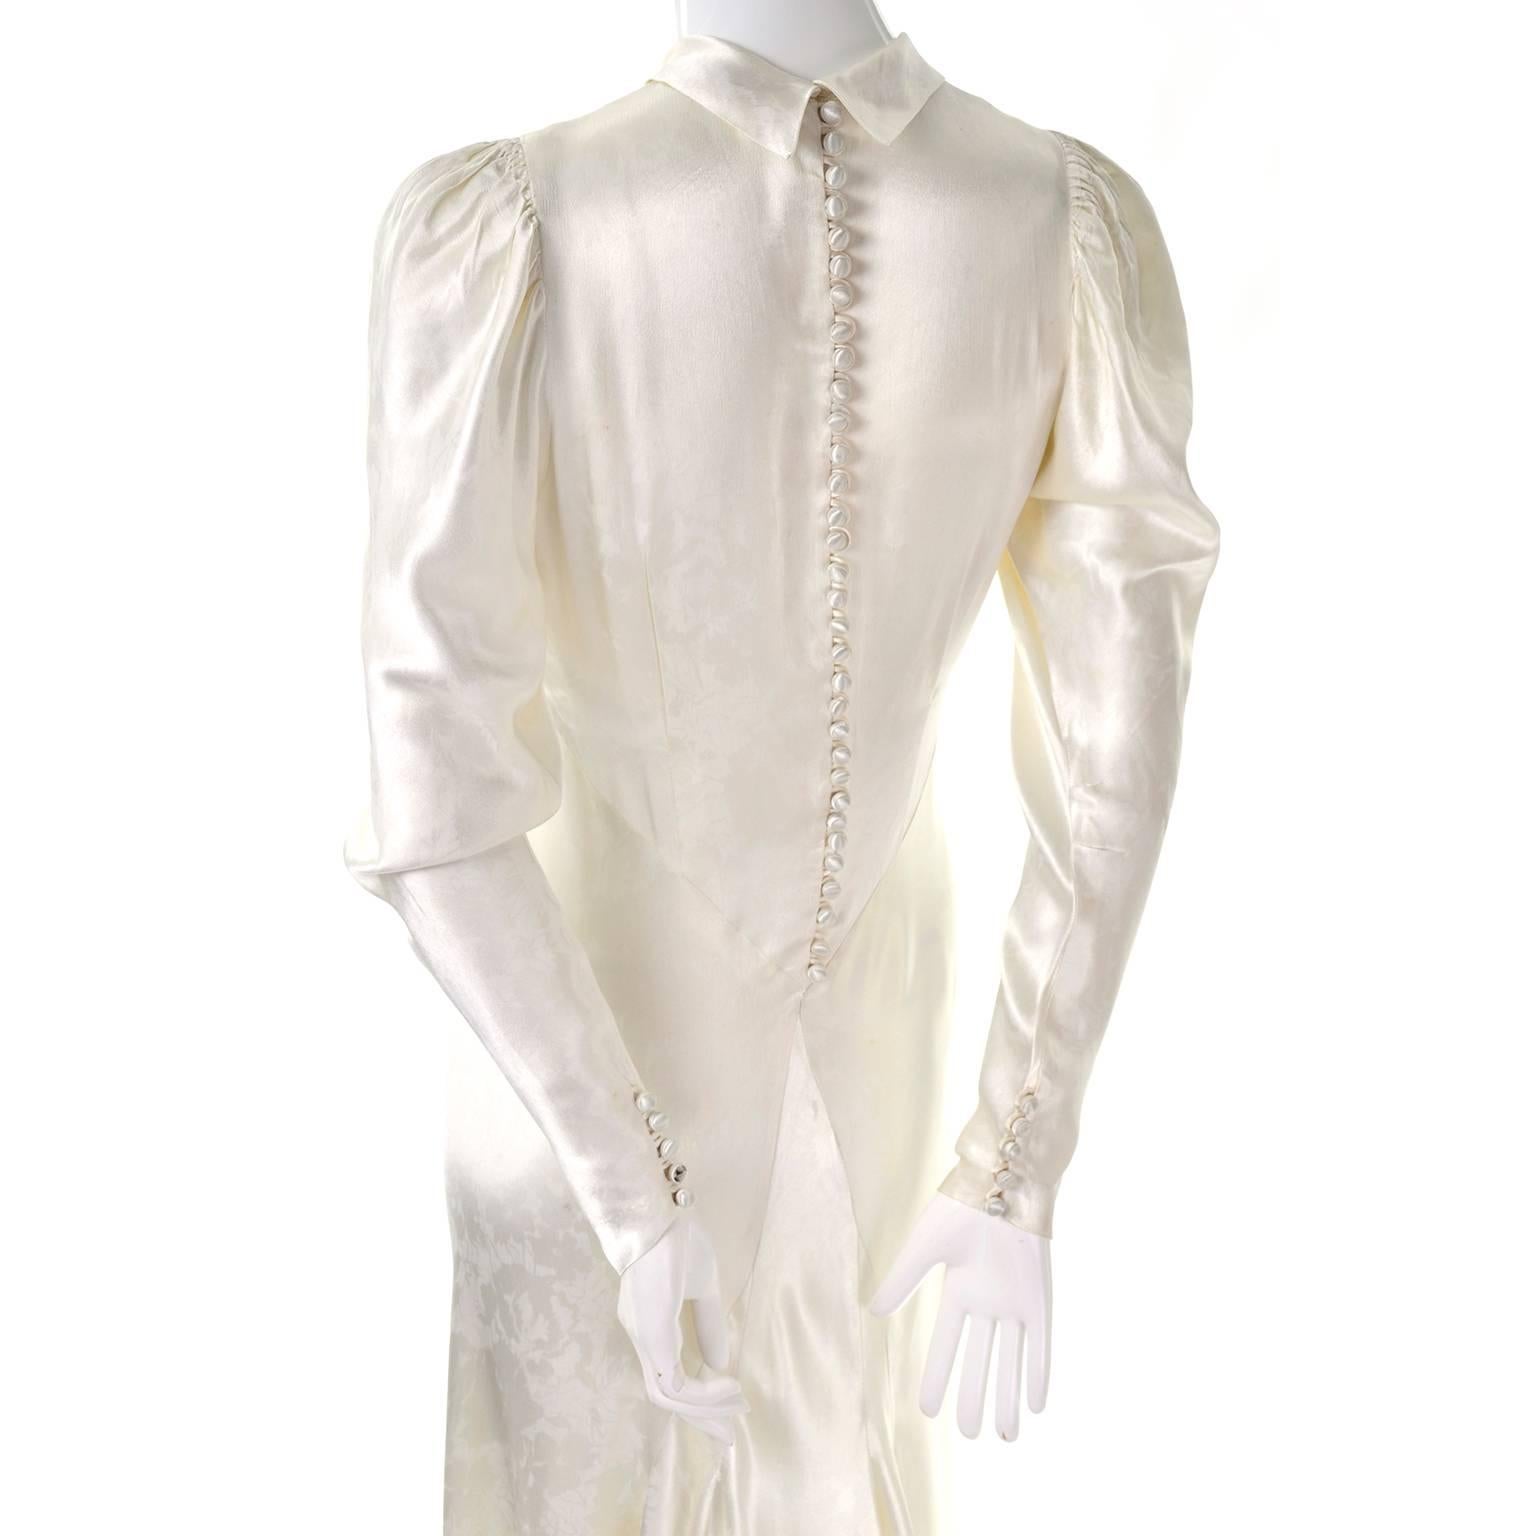 Women's 1930s Vintage Ivory Silk Satin Wedding Dress with Train and High Neck